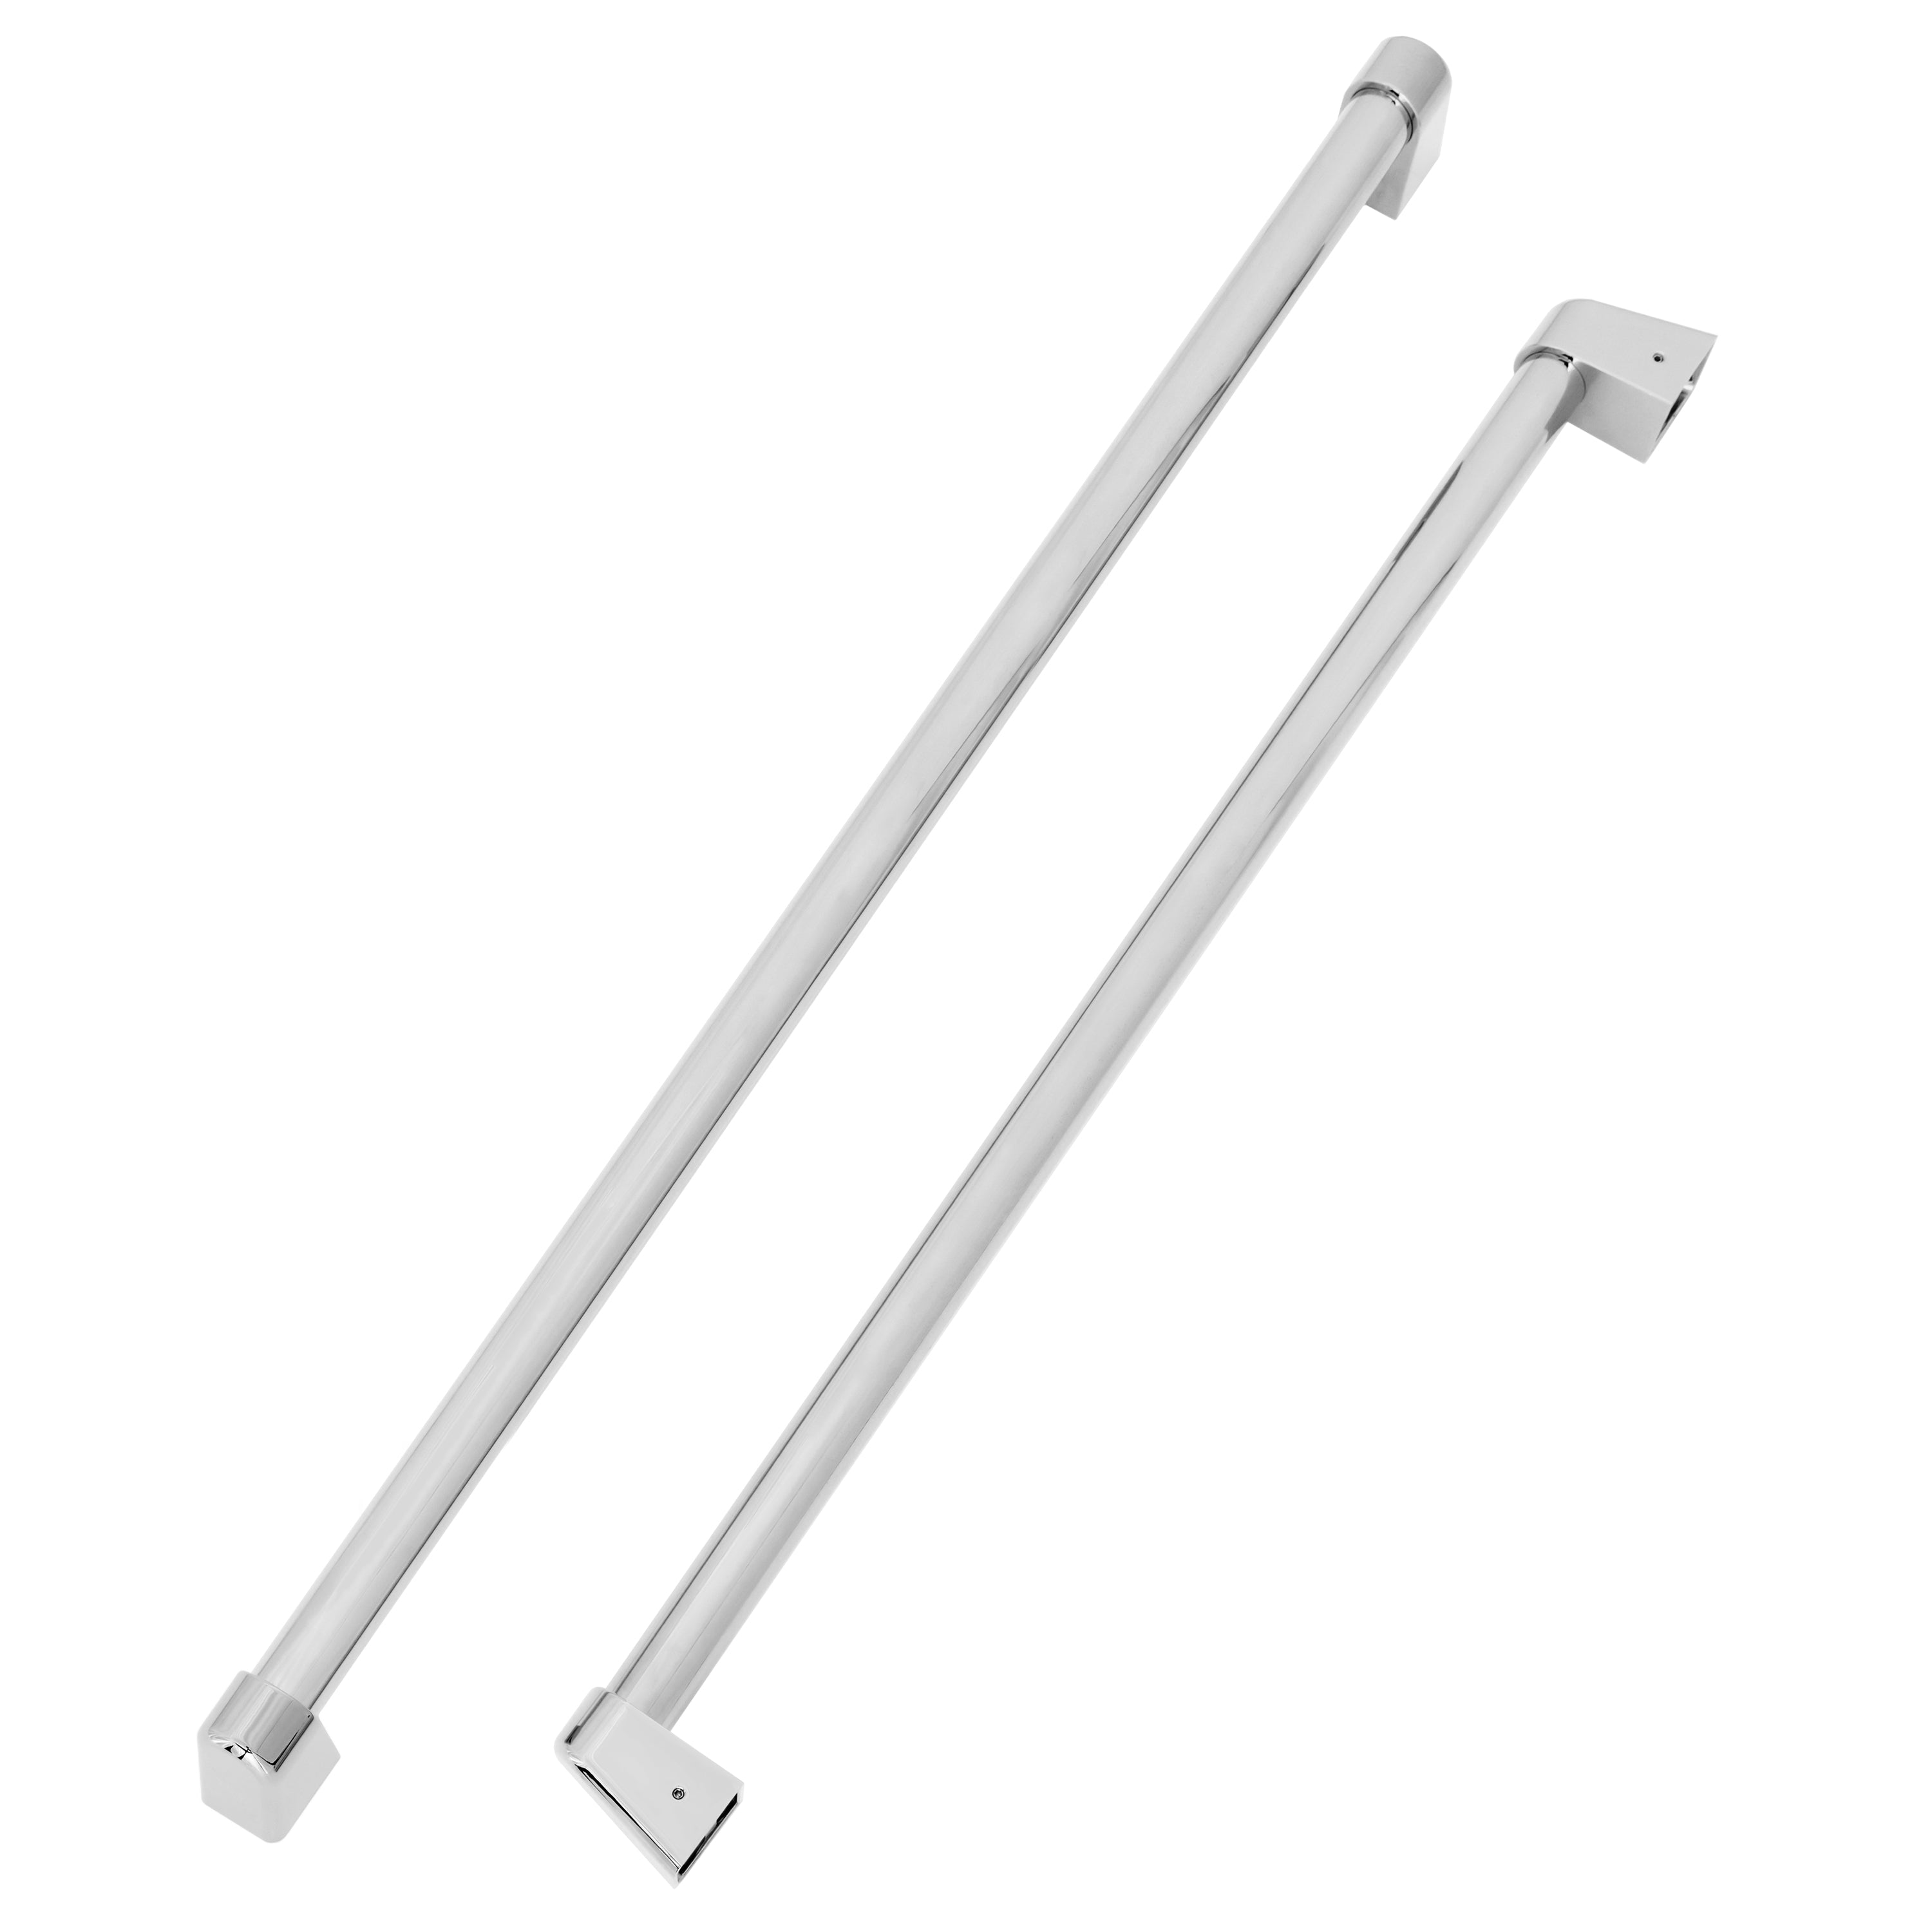 ZLINE 36" Refrigerator Panels in Stainless Steel for a 36" Buit-in Refrigerator (RPBIV-304-36)